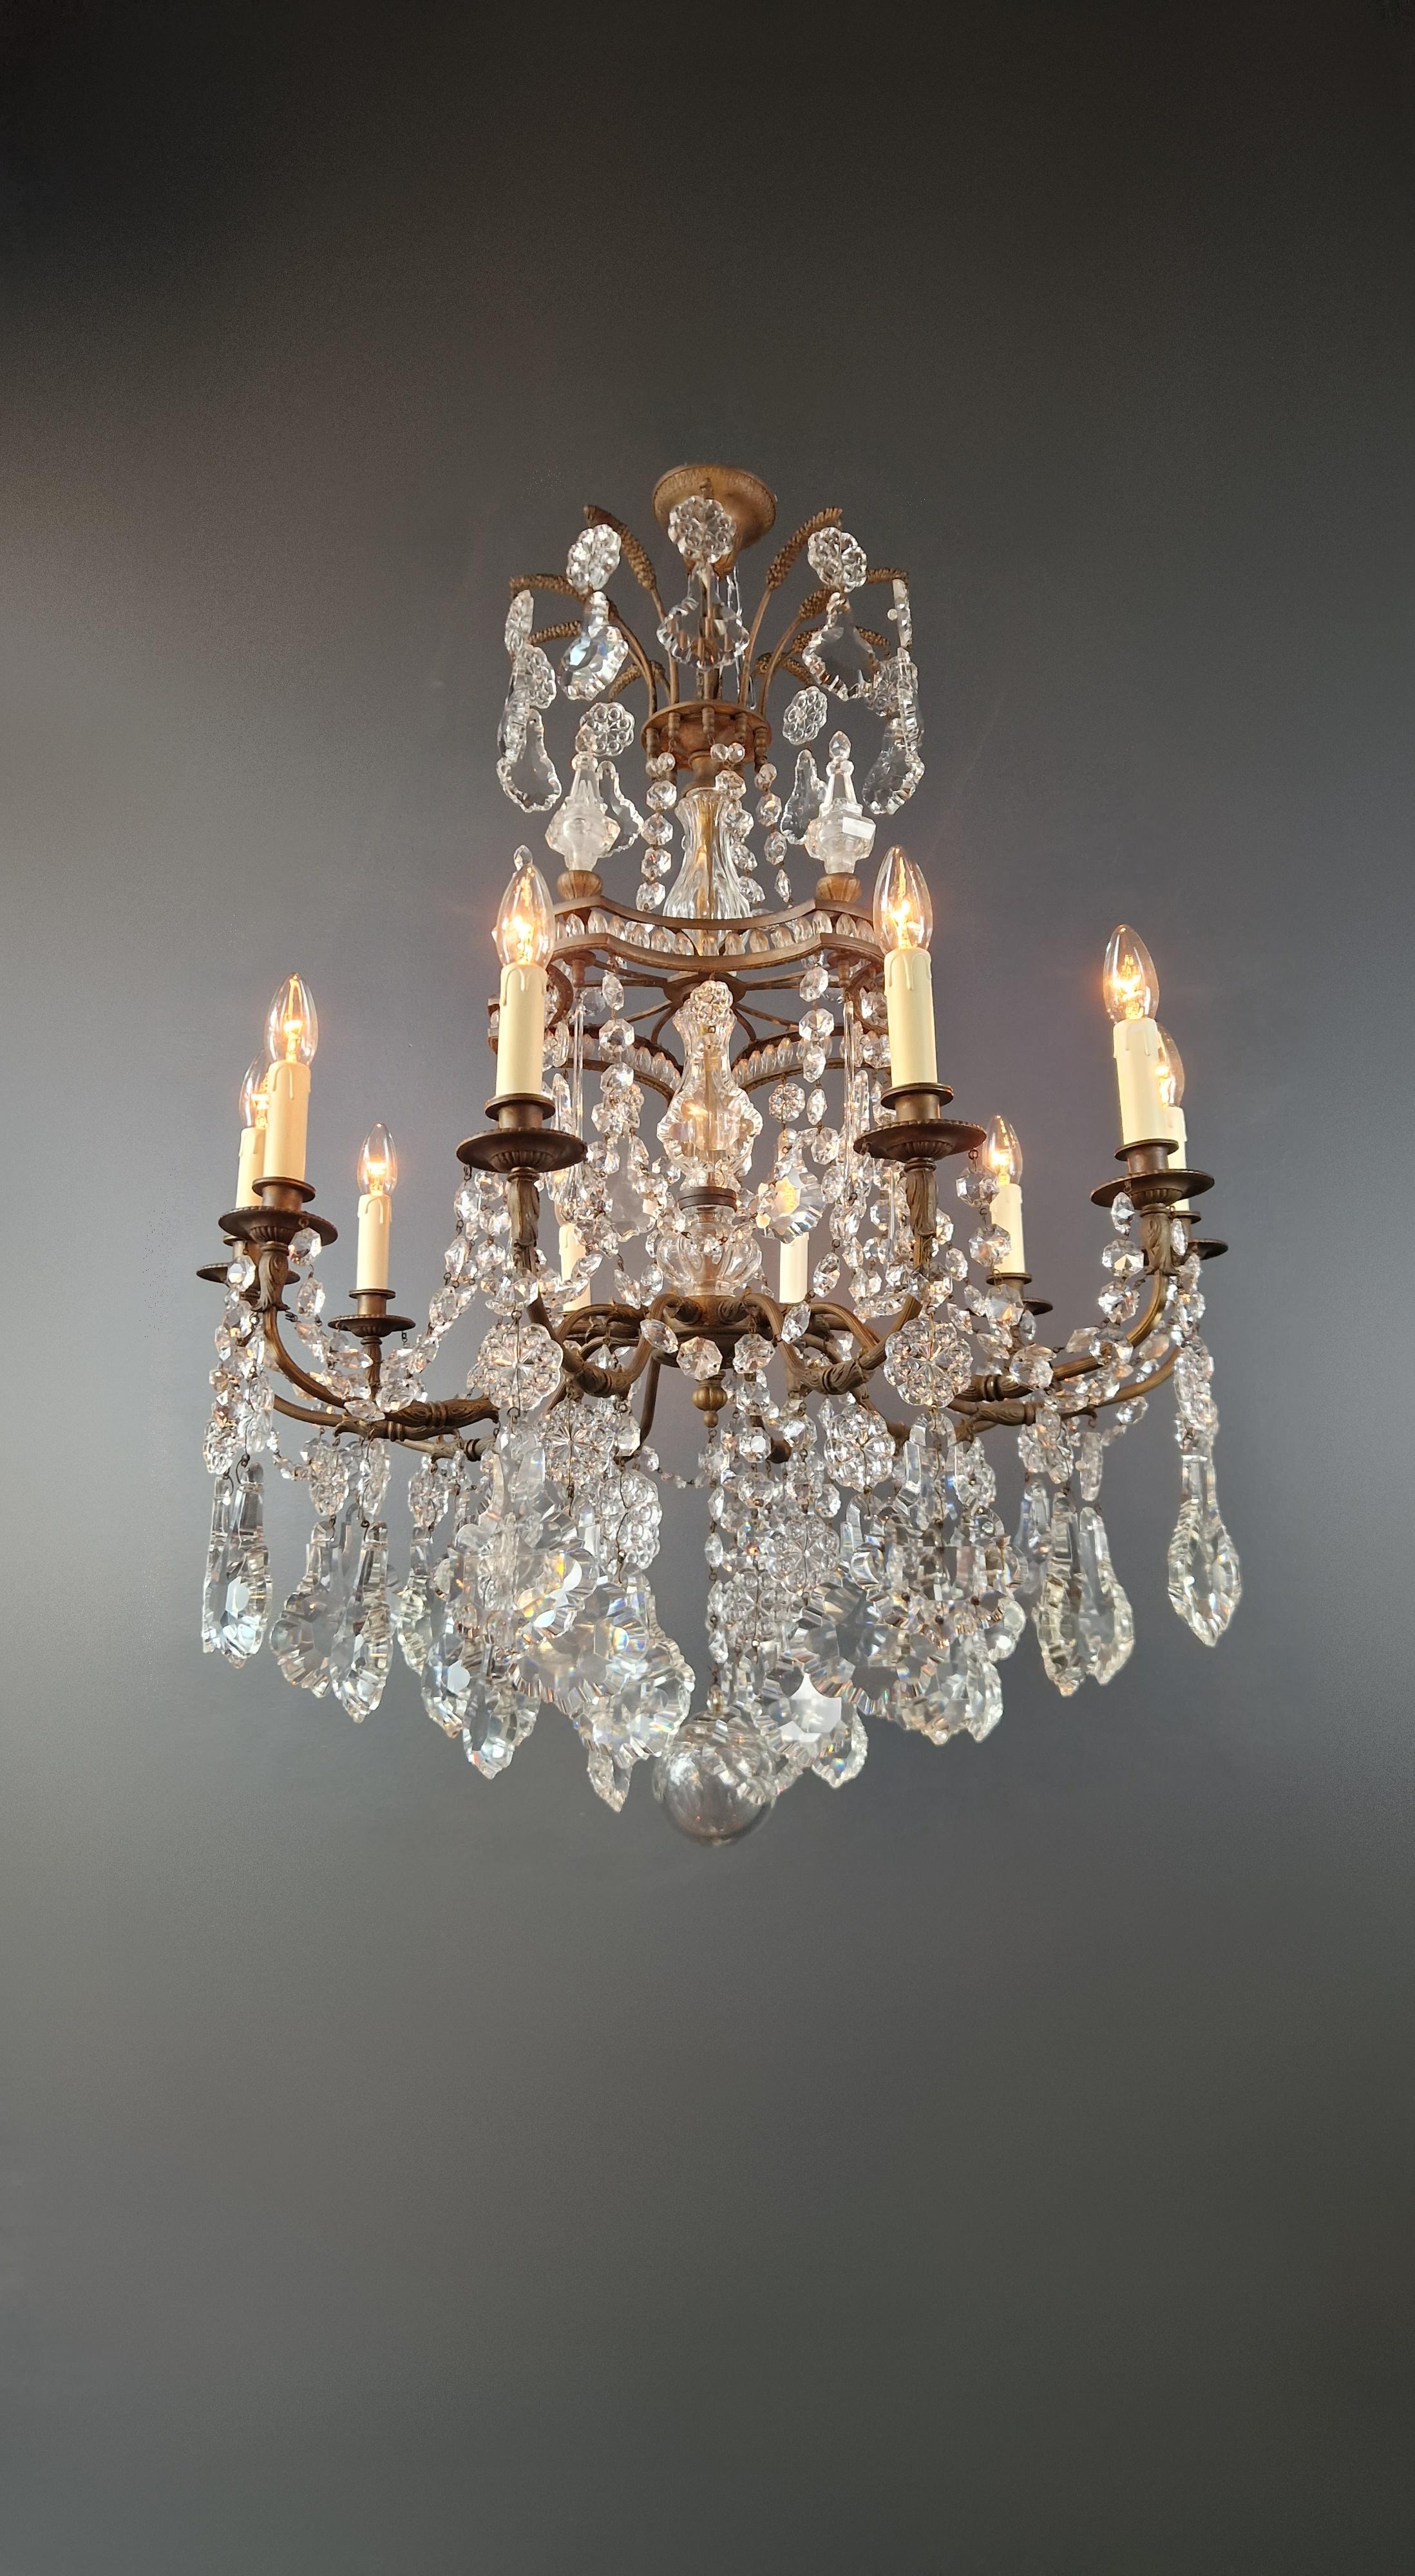 Early 20th Century Art Nouveau Crystal Chandelier Brass Large Crystals Traditional Antique Ceiling For Sale